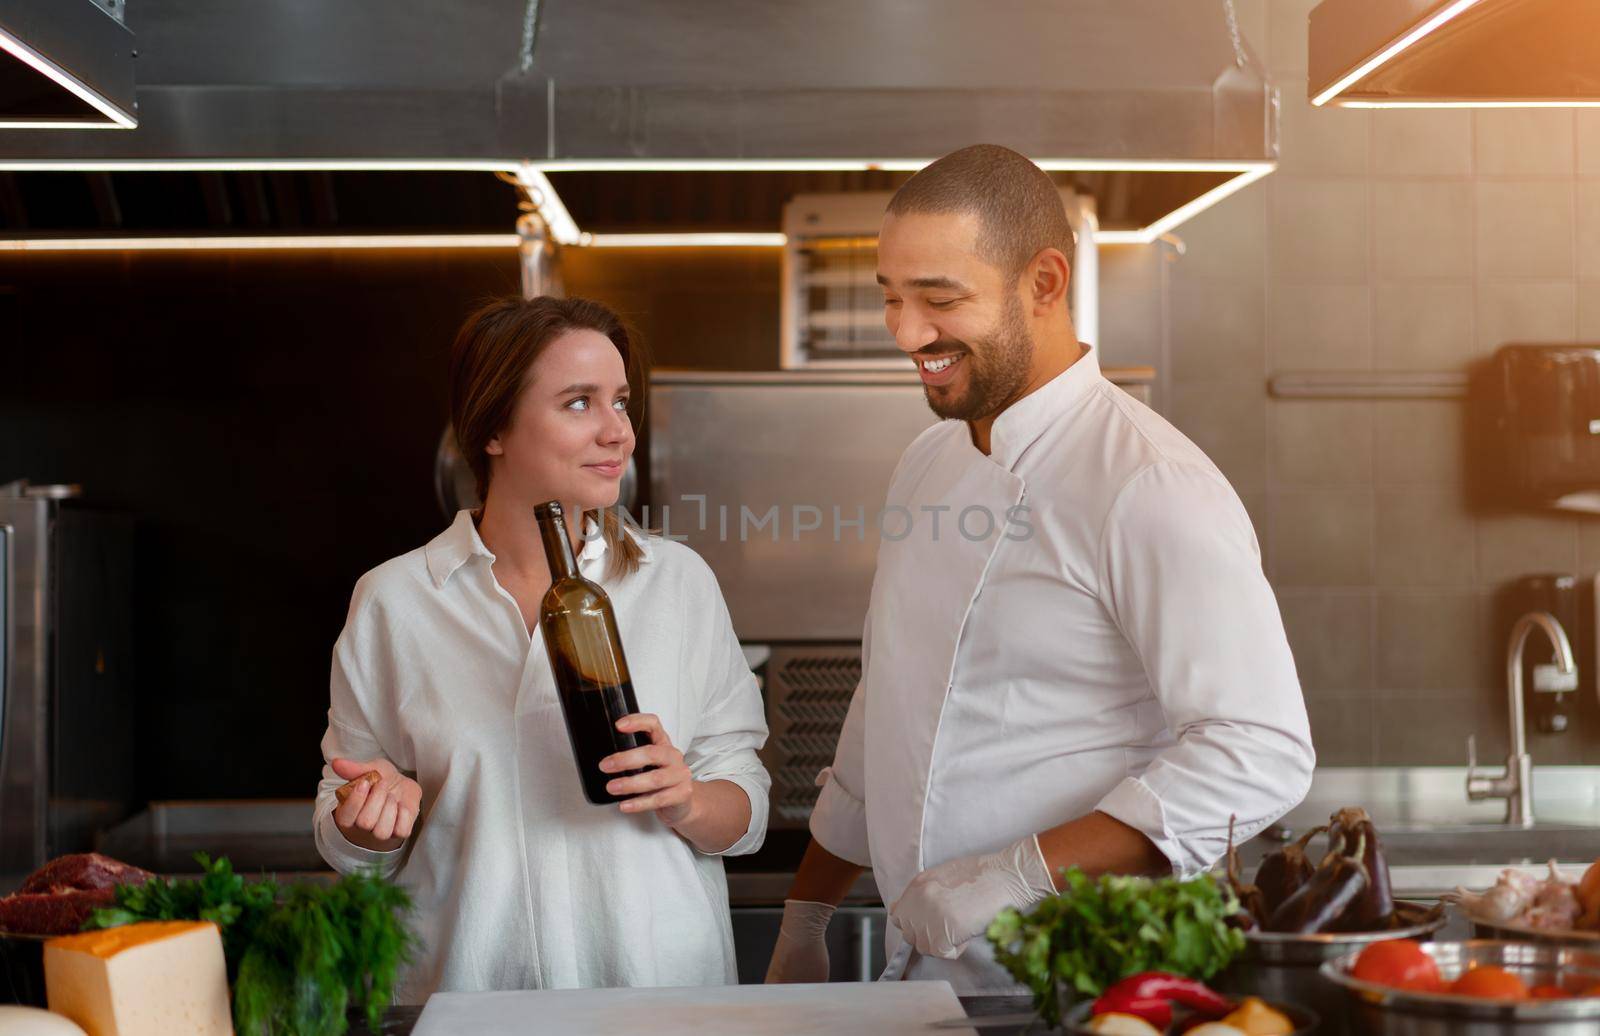 Handsome young African chef is cooking together with Caucasian girlfriend in the kitchen using red wine ingredient. A cook teaches a girl how to cook. Man and woman cooking in professional kitchen.